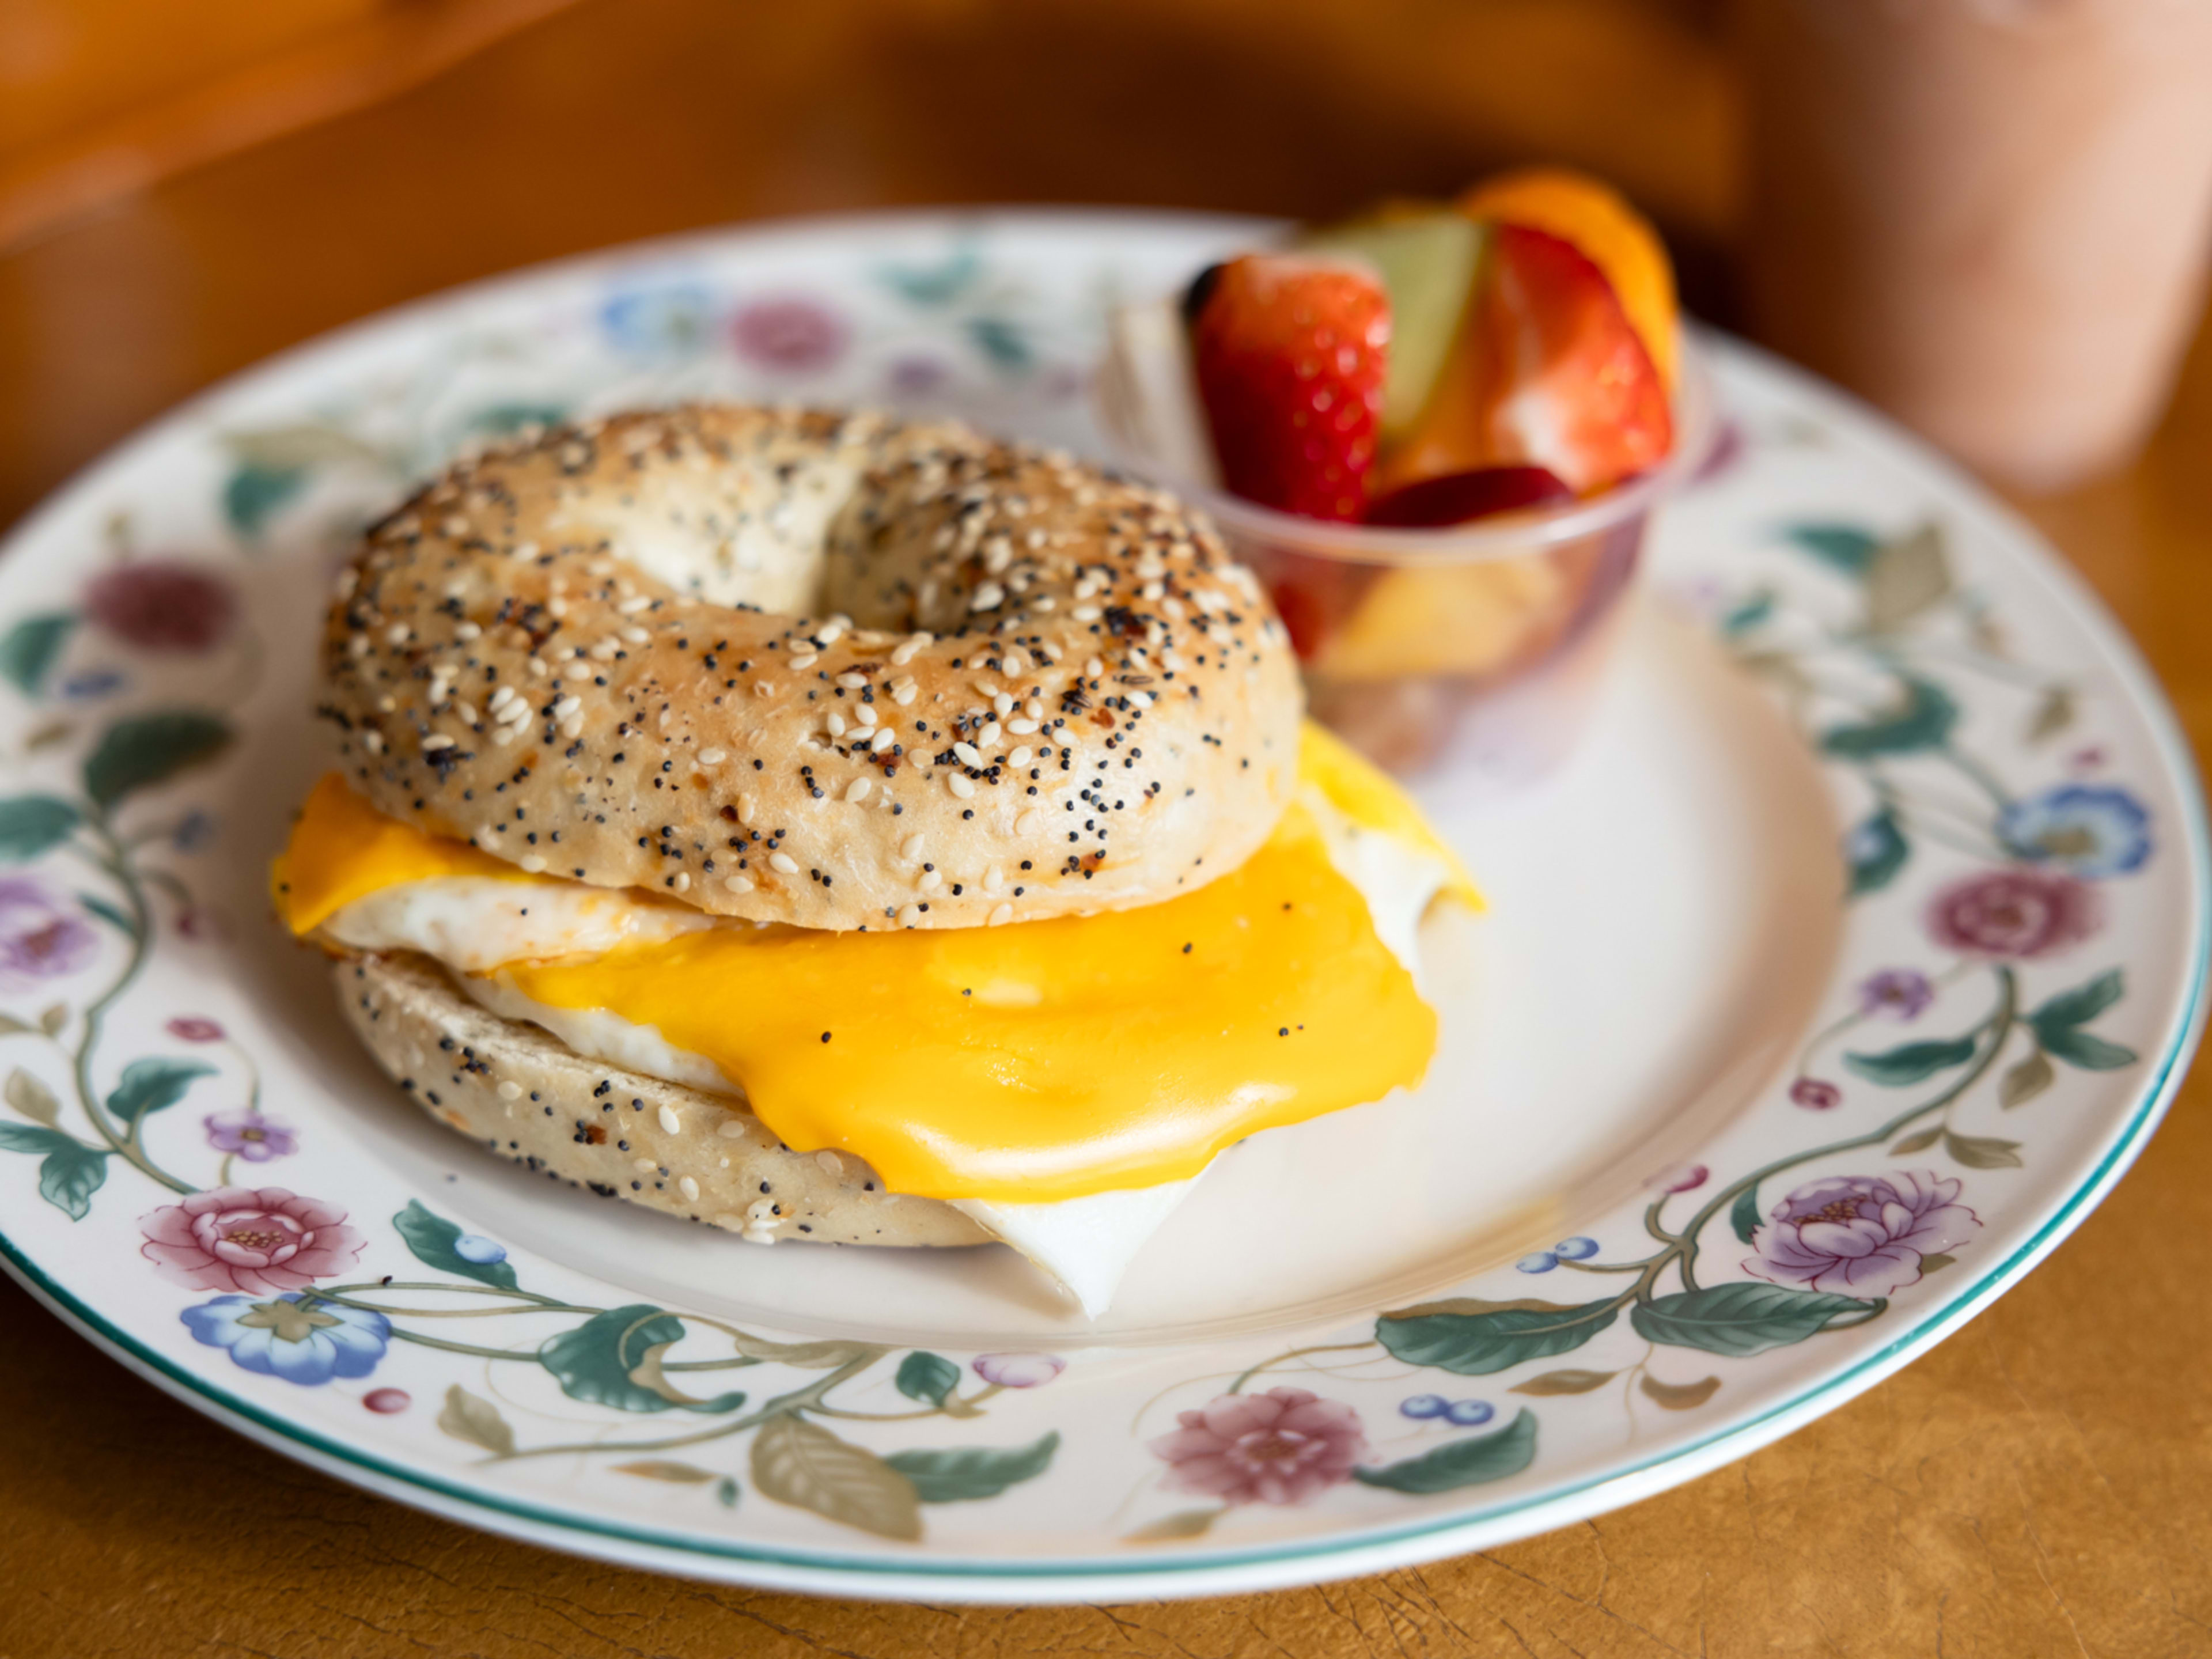 egg and cheese bagel sandwich